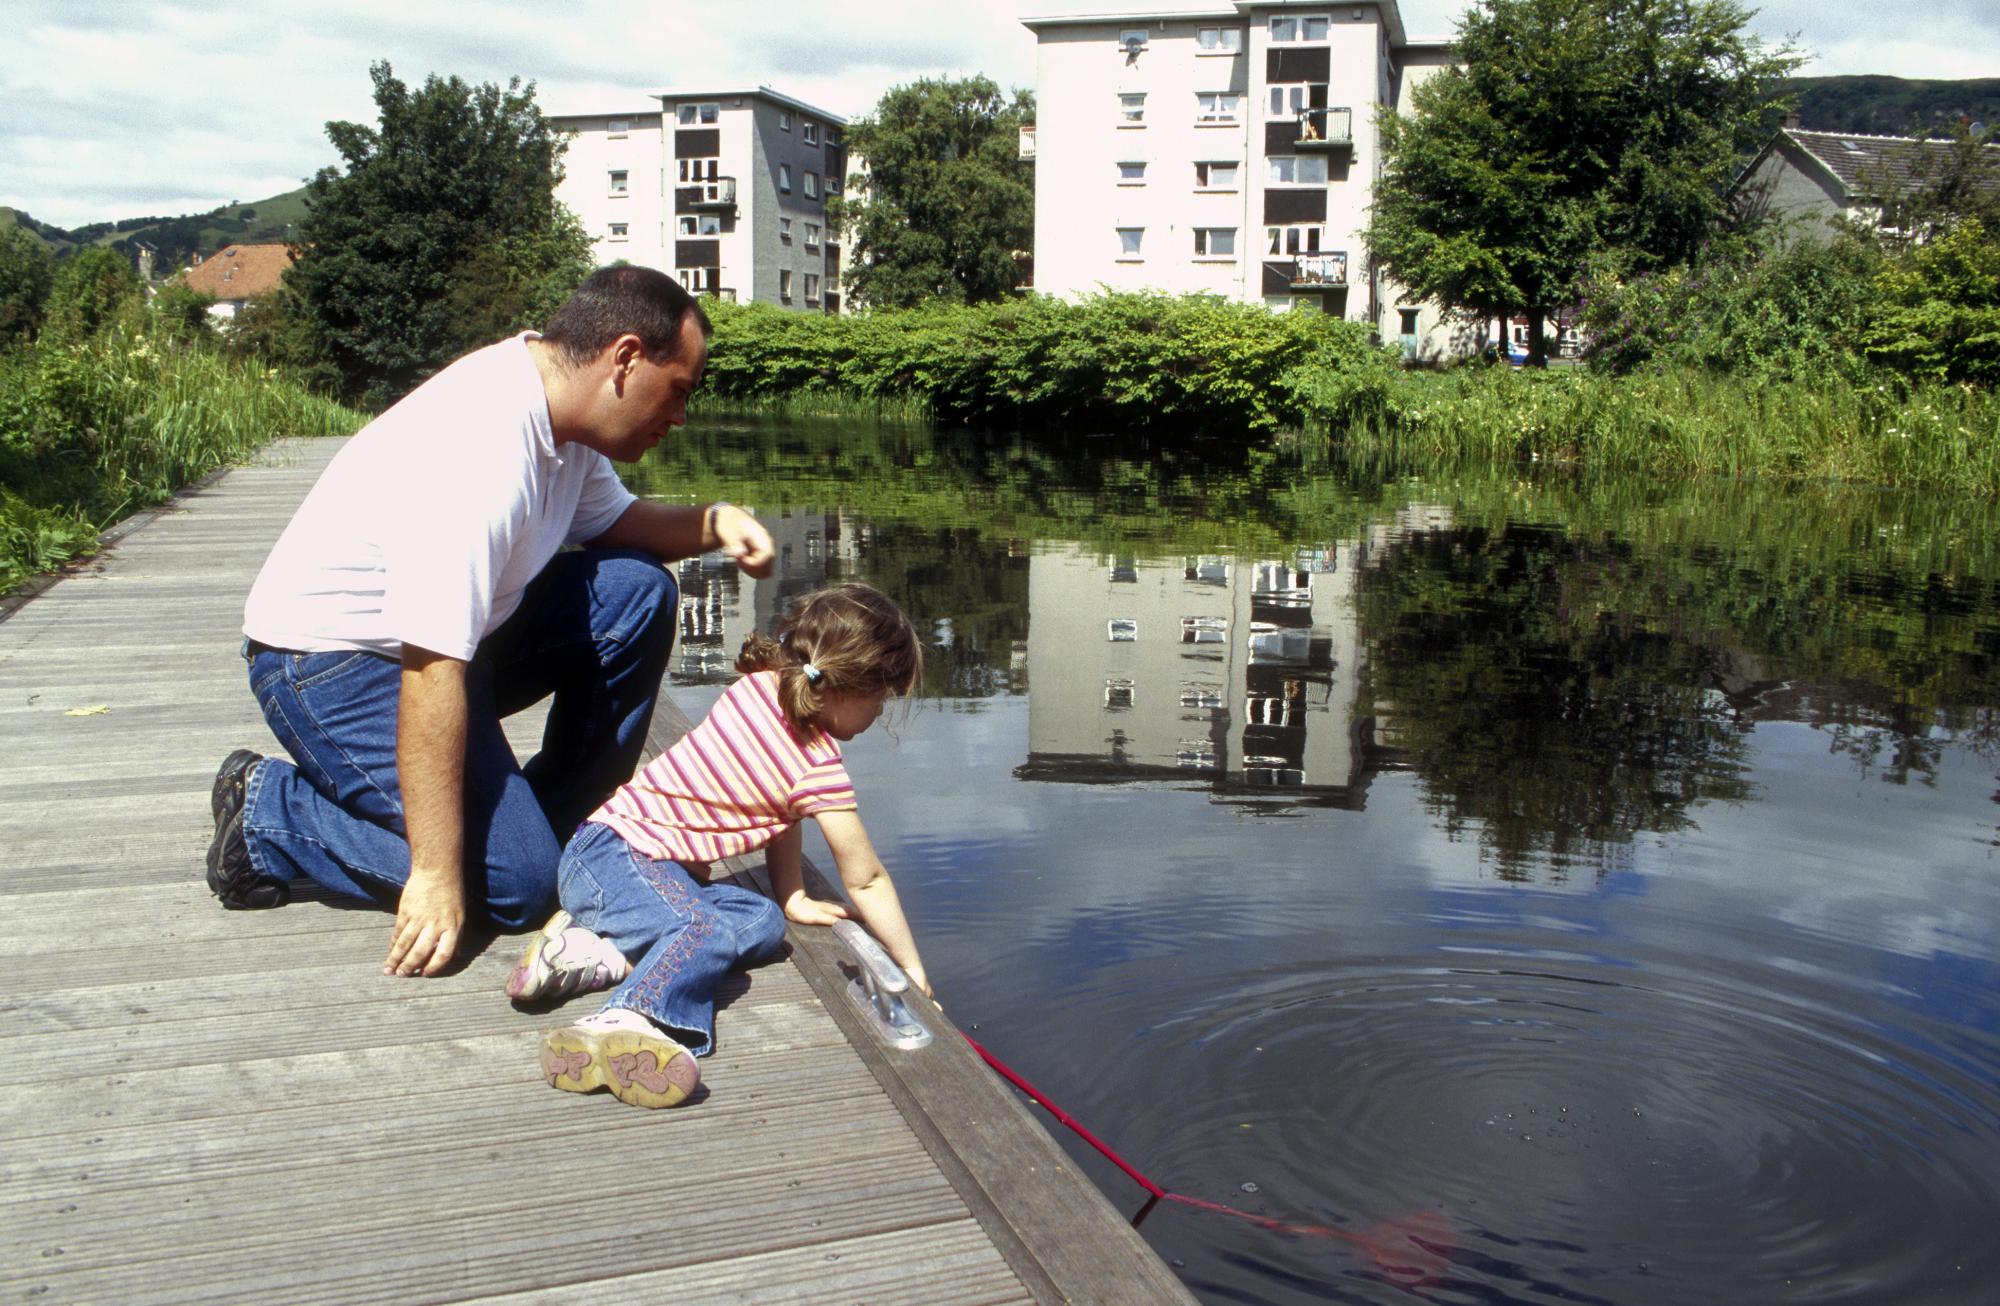 Pond-dipping by the Forth & Clyde Canal, Old Kilpatrick